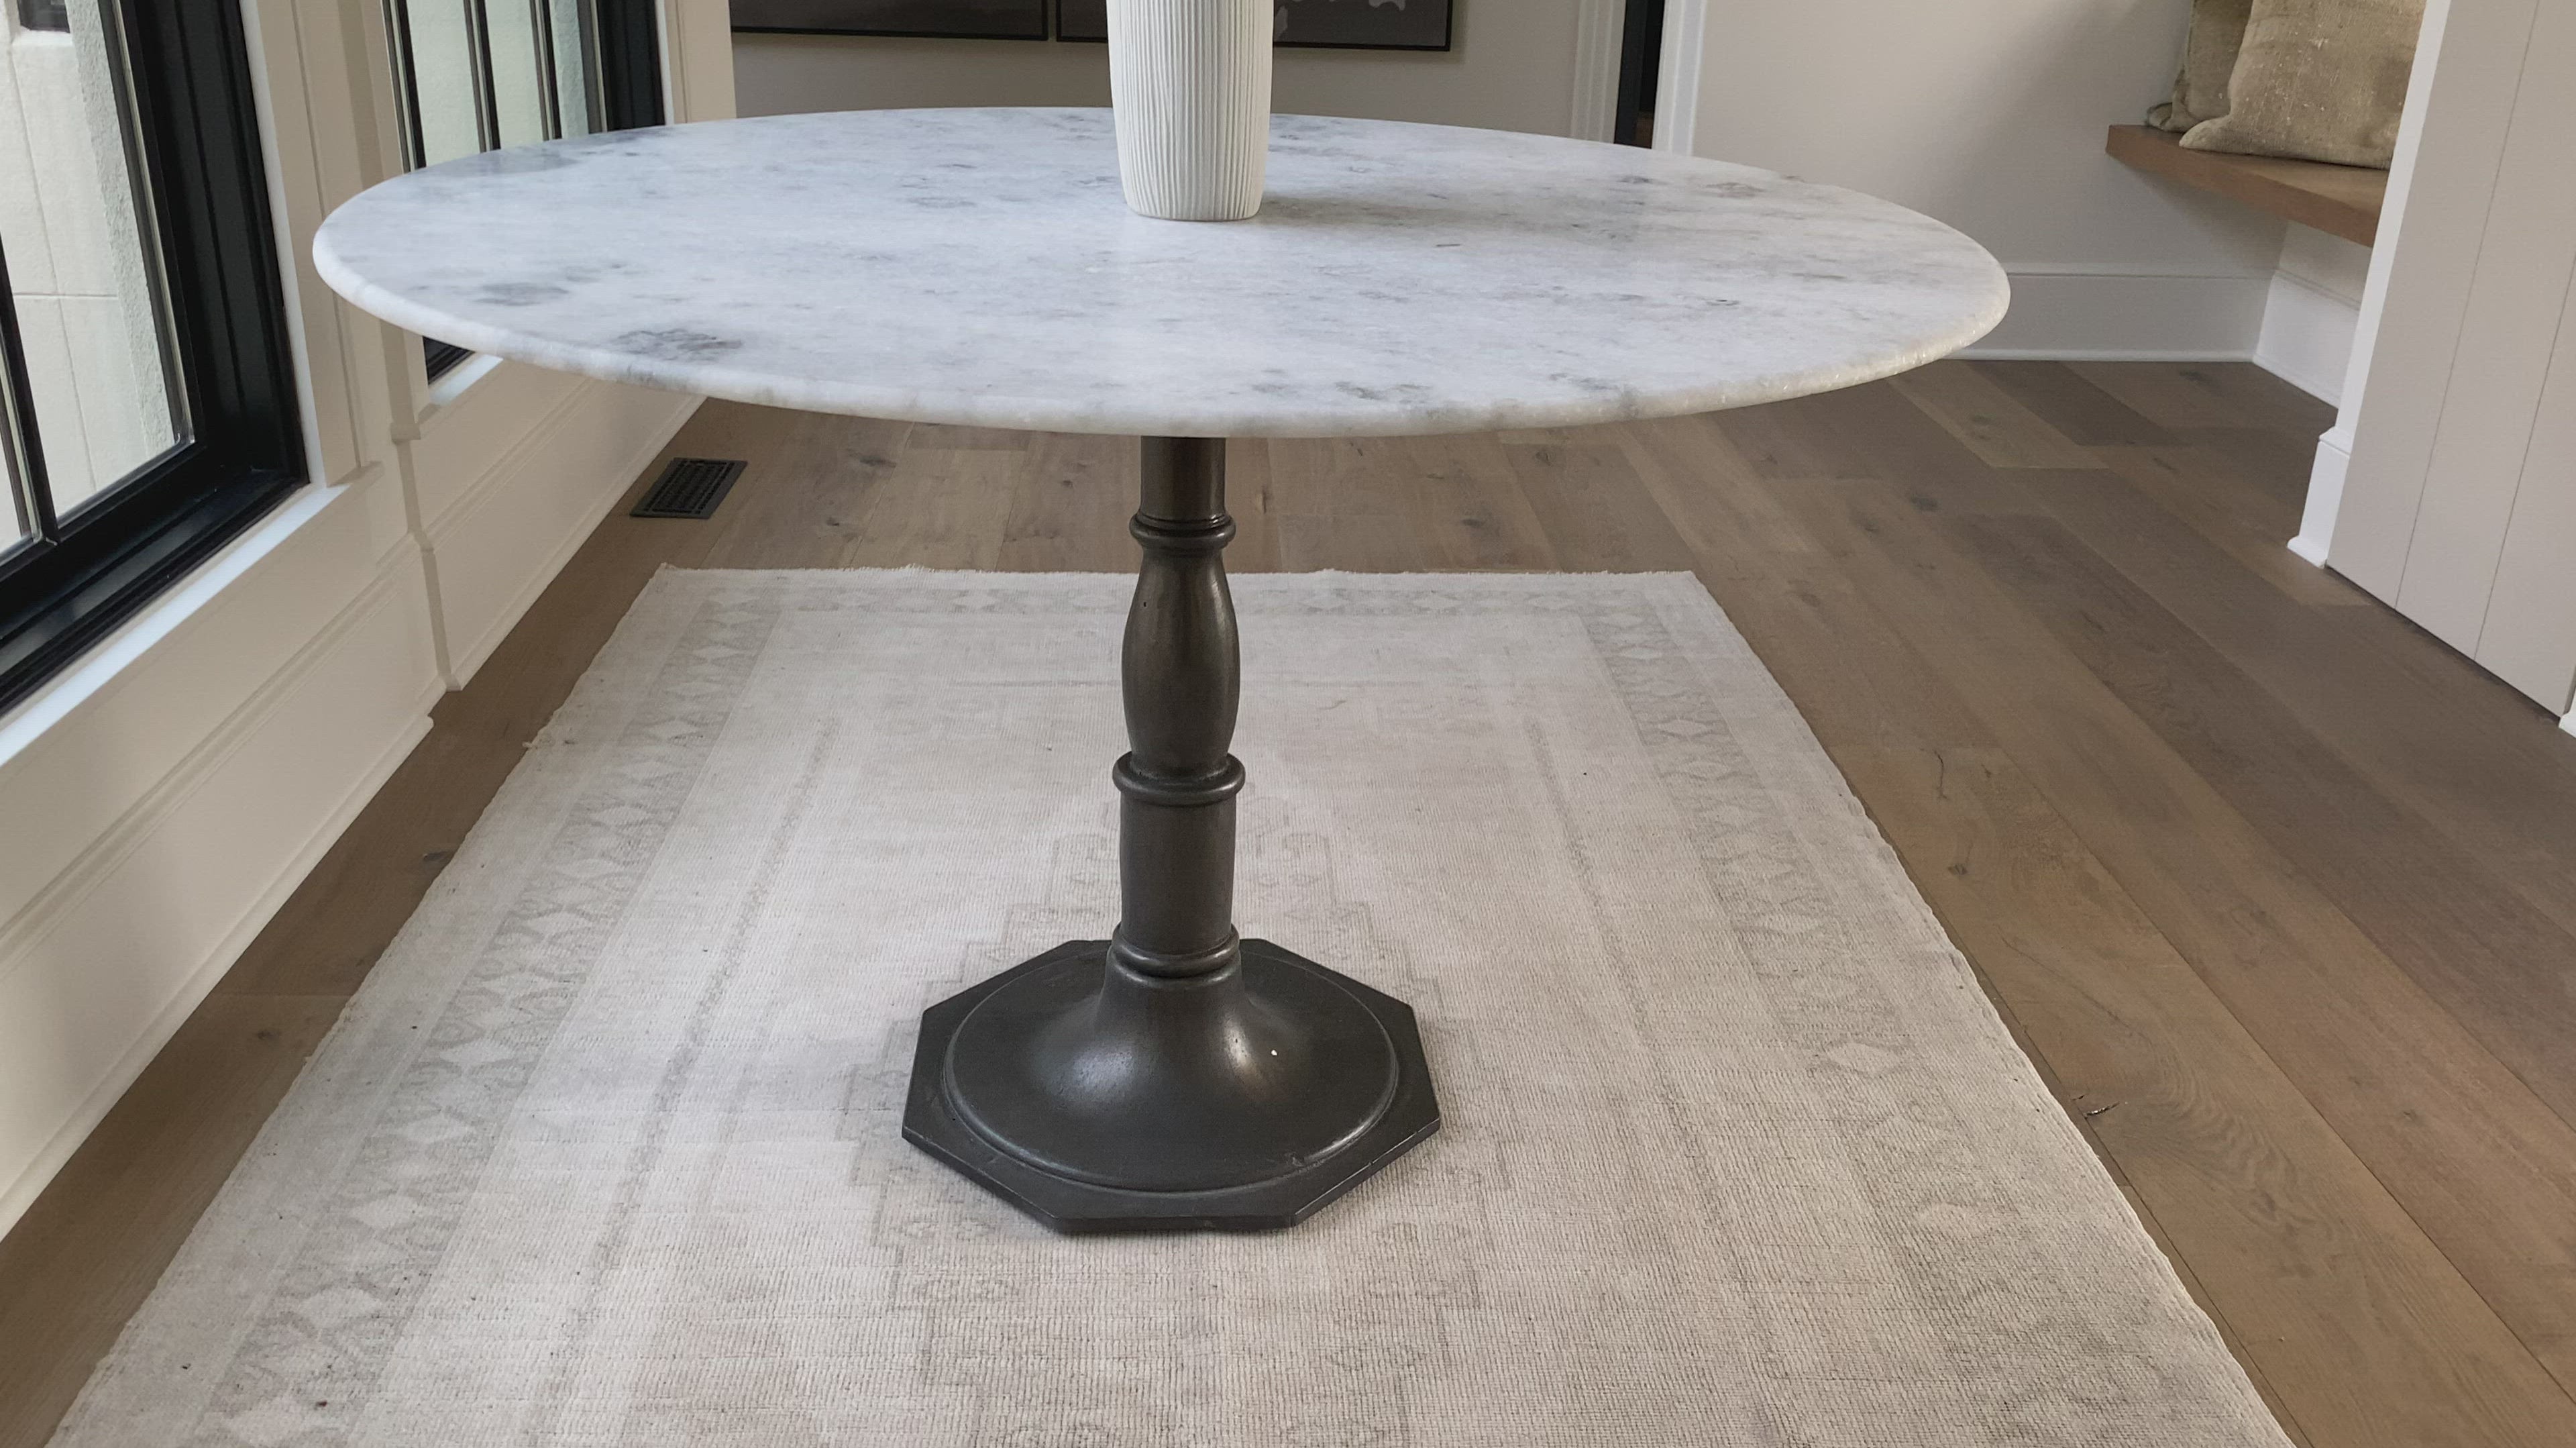 French-industrial meets bistro table. Detailed, 8-sided cast iron pedestal supports a dramatic white marble top with bull-nosed edge.  Overall Size: 36.00"w x 36.00"d x 31.00"h  Colors: Carbon Wash, White Marble Materials: Iron, Marble